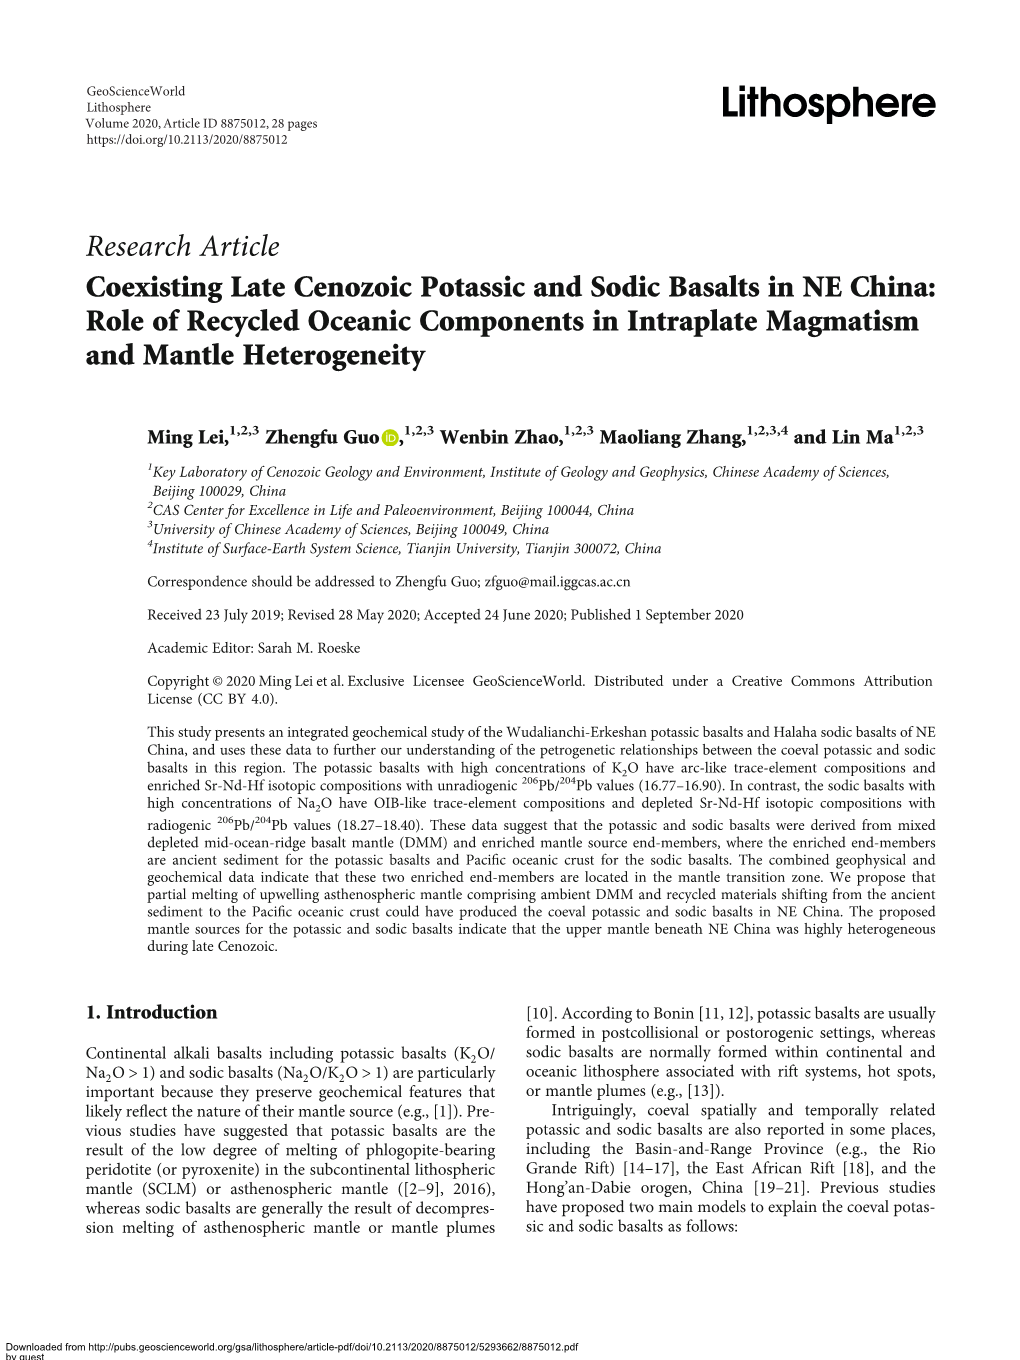 Research Article Coexisting Late Cenozoic Potassic and Sodic Basalts in NE China: Role of Recycled Oceanic Components in Intraplate Magmatism and Mantle Heterogeneity